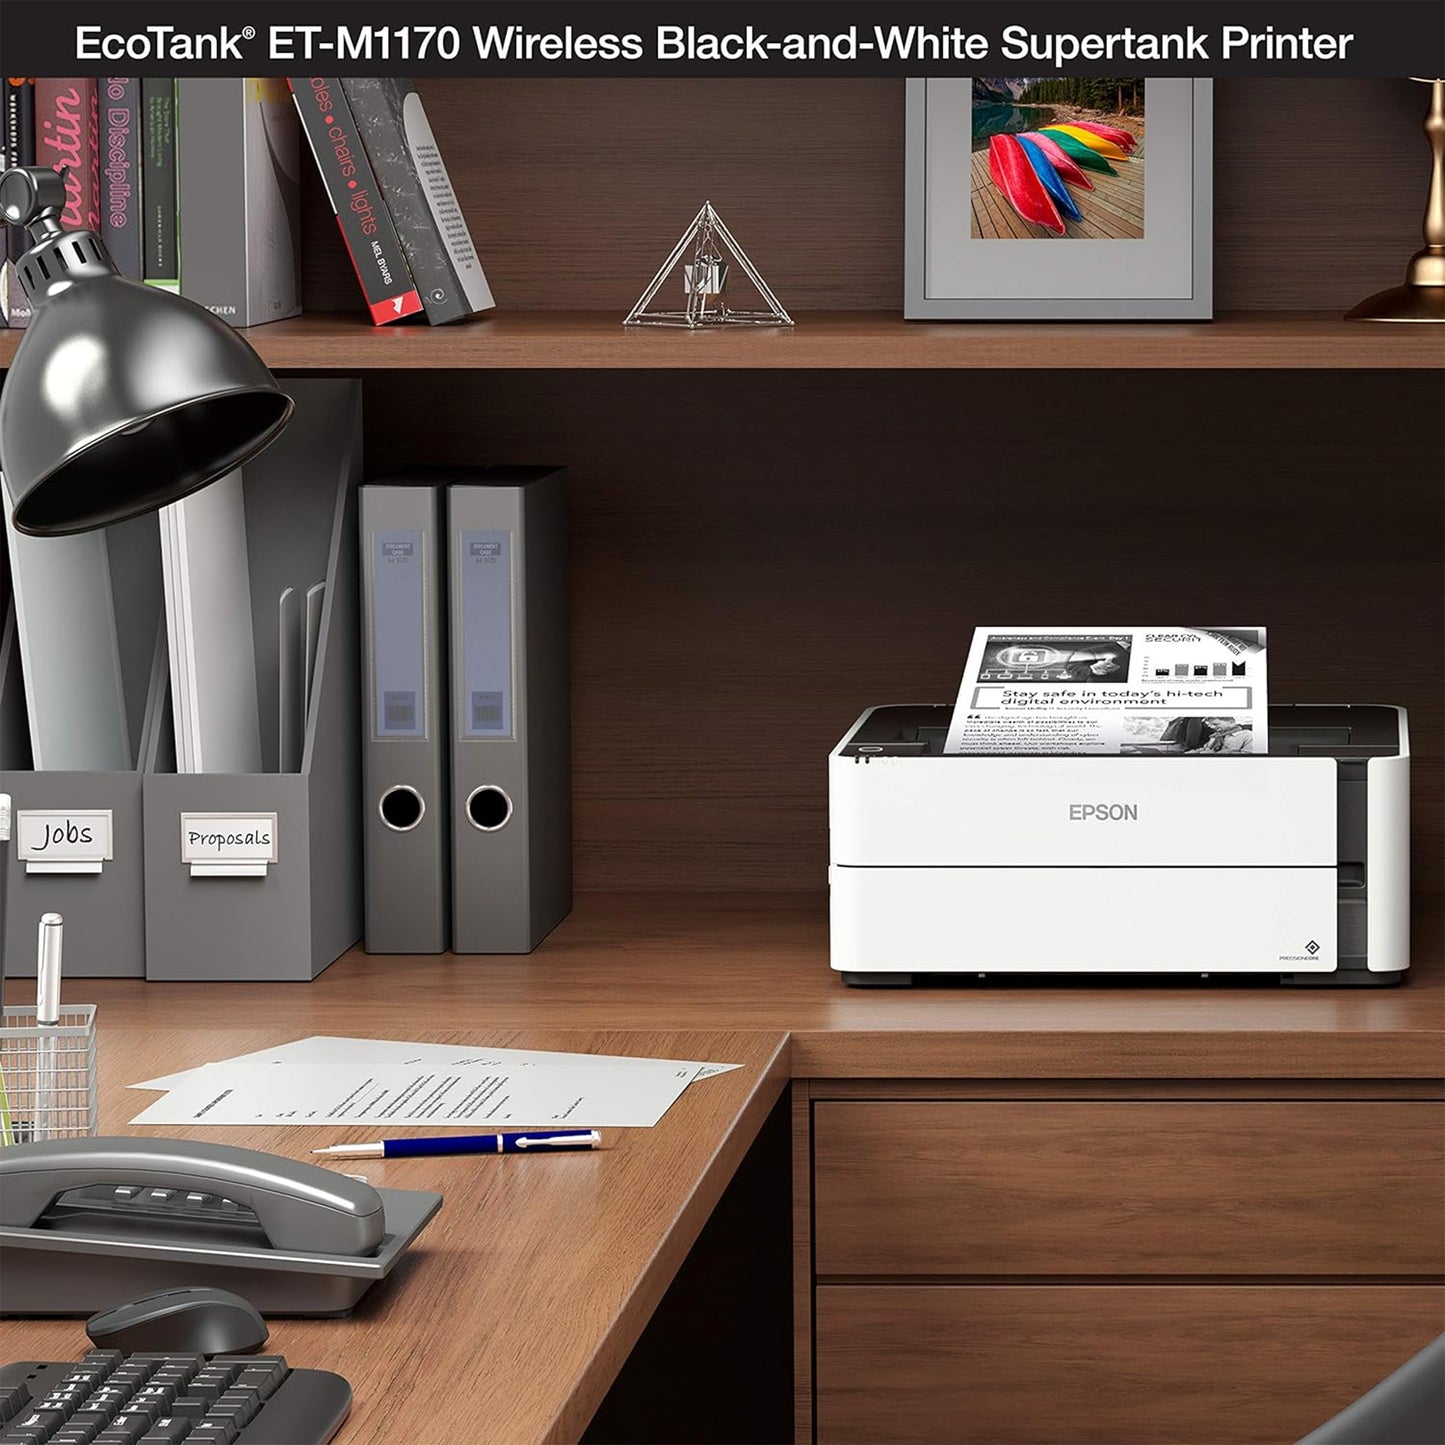 Epson EcoTank ET-M1170 Wireless Monochrome Supertank Printer with Ethernet PLUS 2 Years of Unlimited Ink*,White